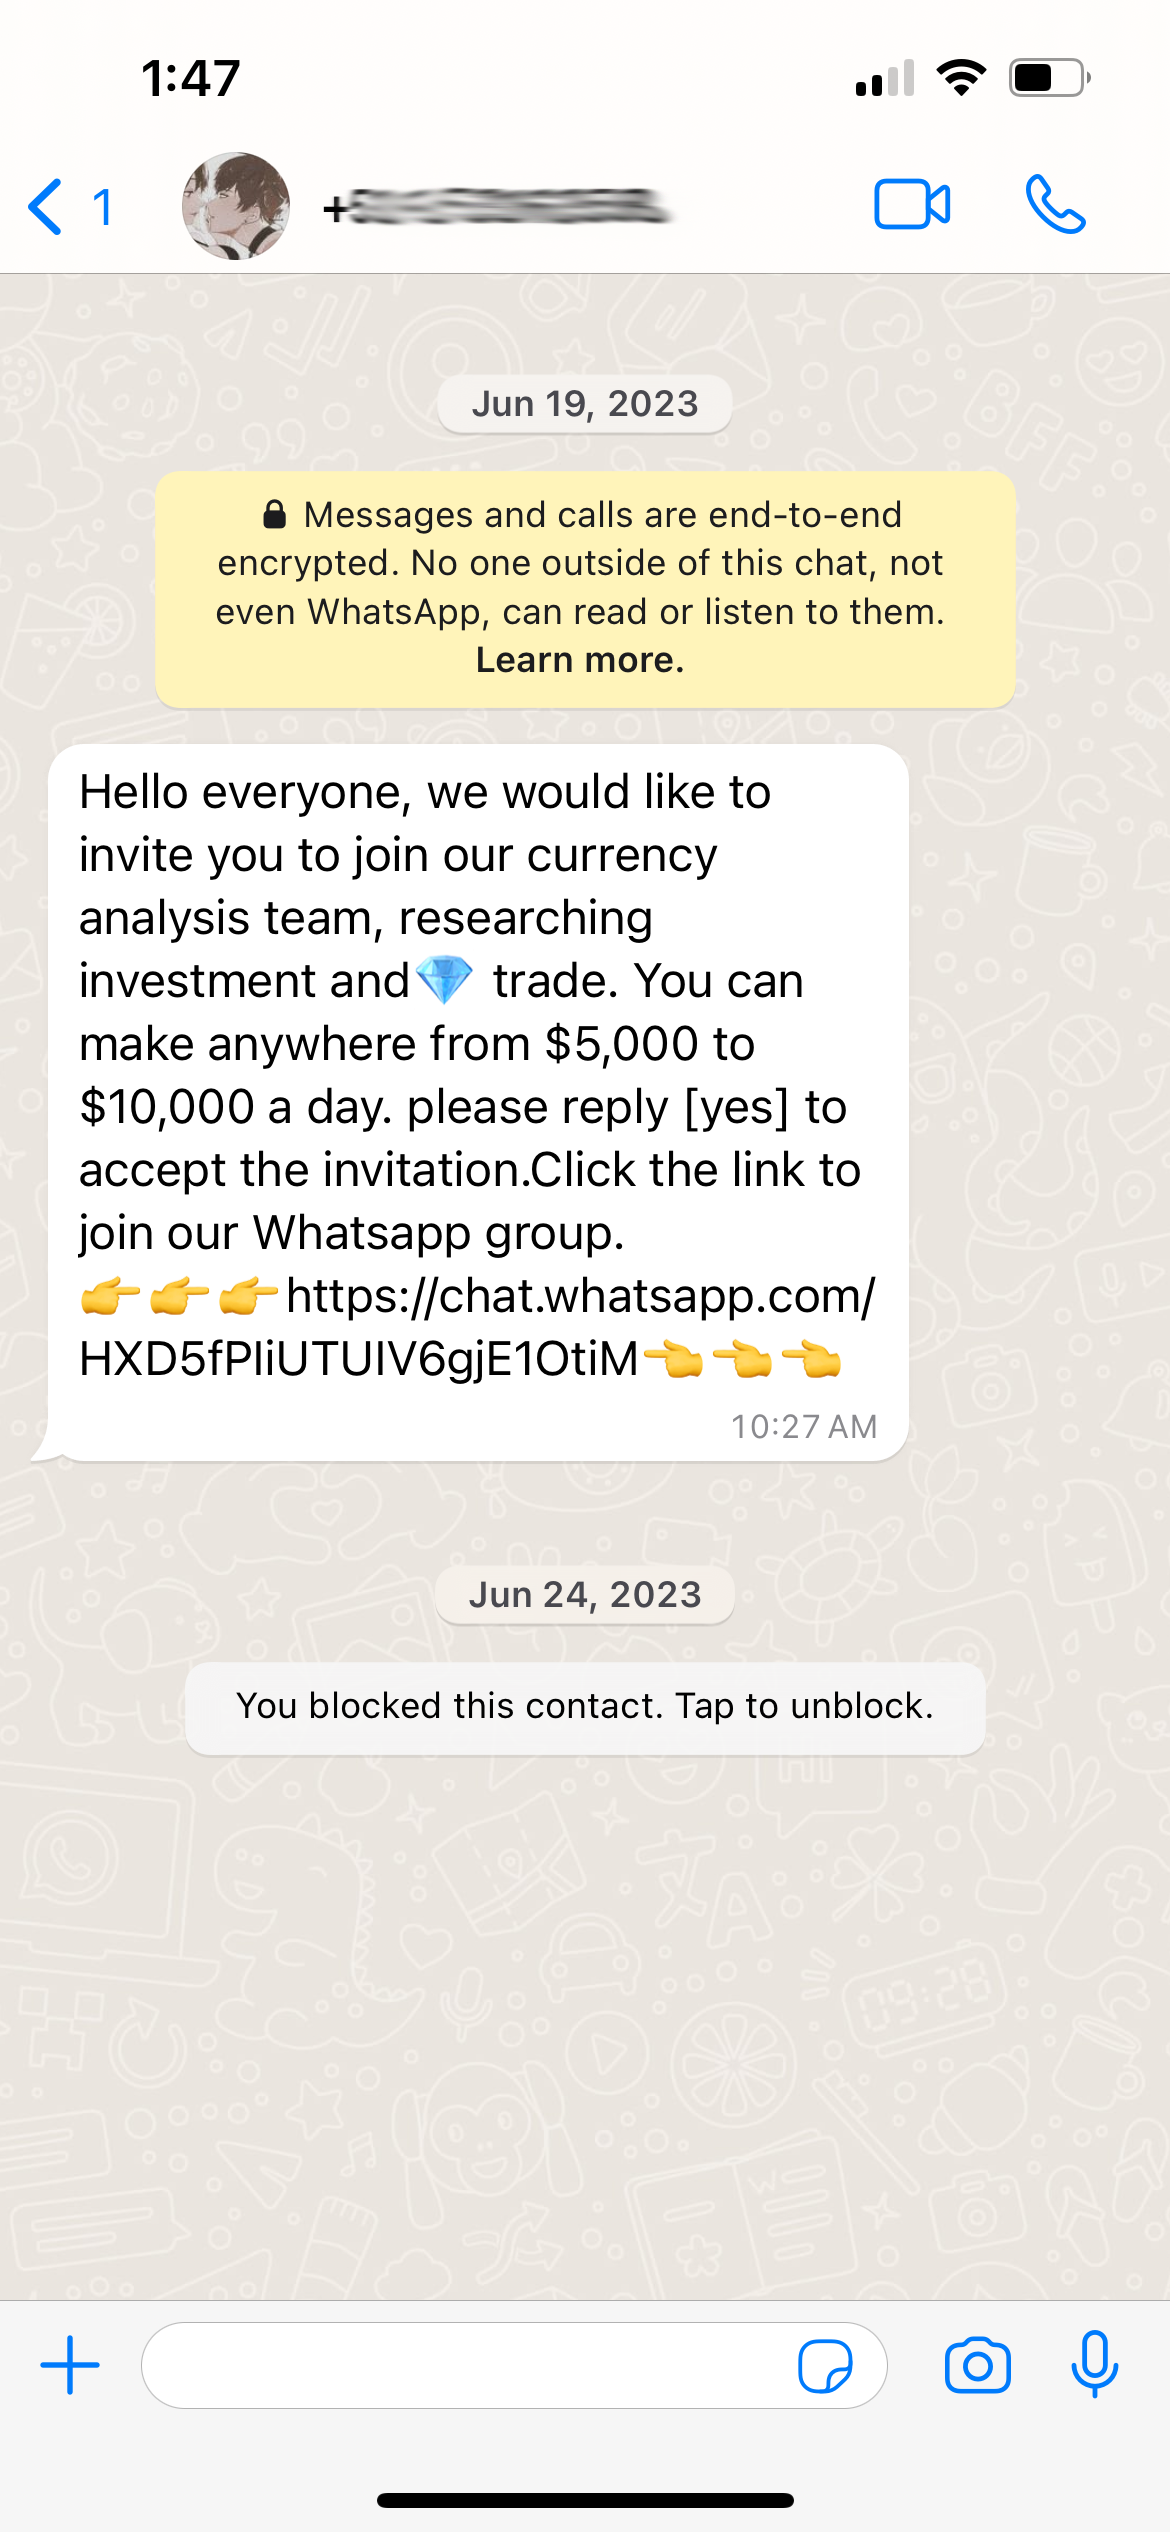 A scam message from WhatsApp